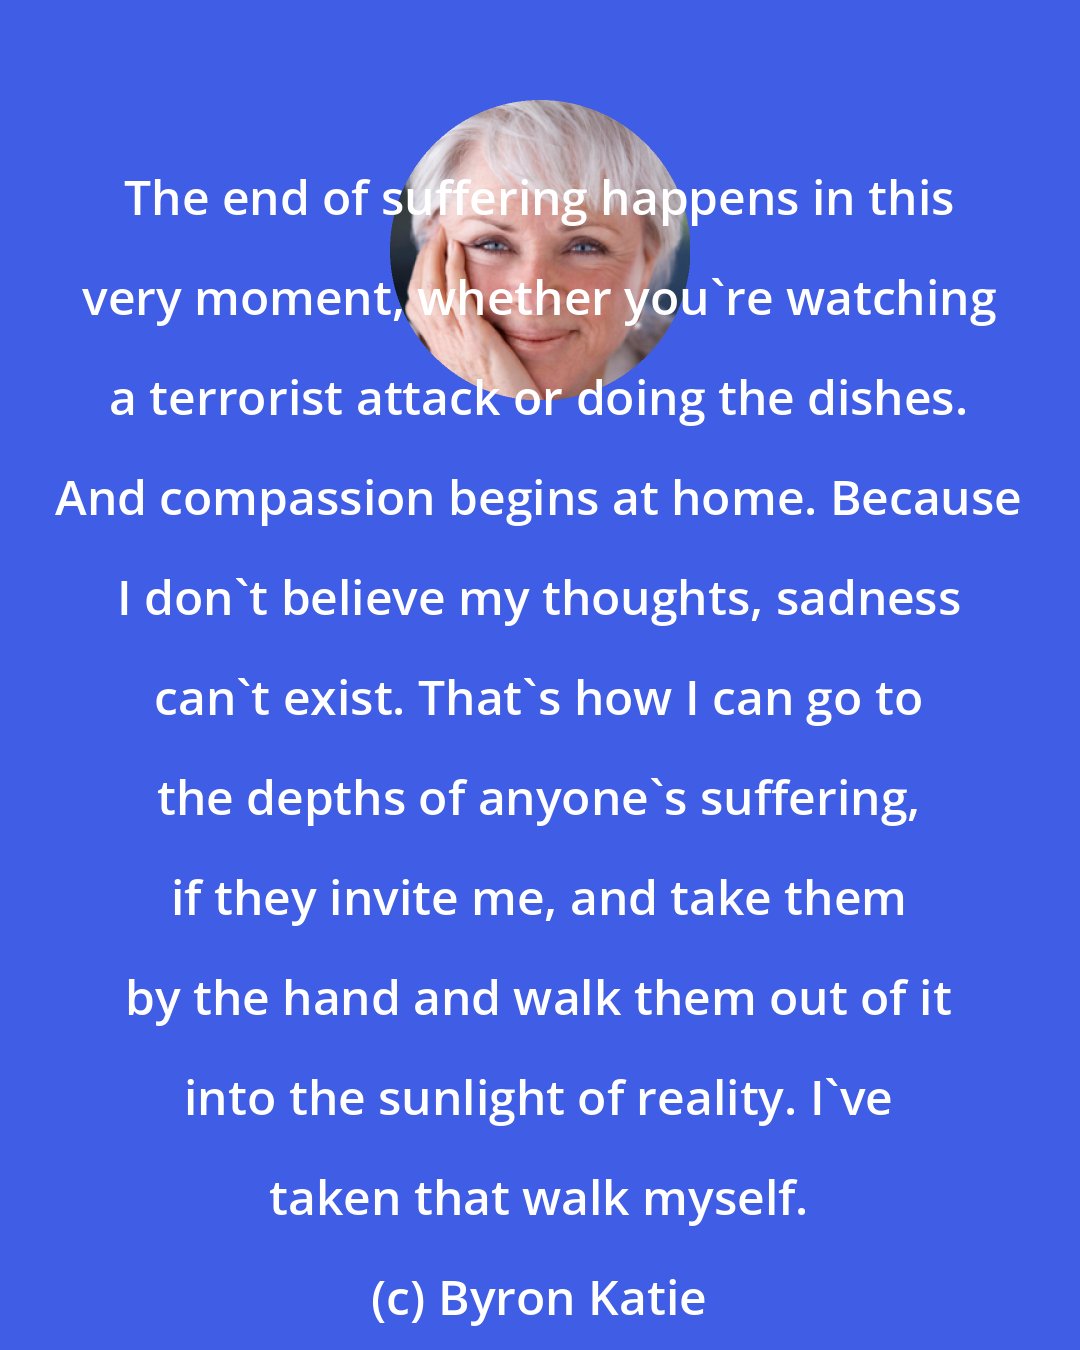 Byron Katie: The end of suffering happens in this very moment, whether you're watching a terrorist attack or doing the dishes. And compassion begins at home. Because I don't believe my thoughts, sadness can't exist. That's how I can go to the depths of anyone's suffering, if they invite me, and take them by the hand and walk them out of it into the sunlight of reality. I've taken that walk myself.